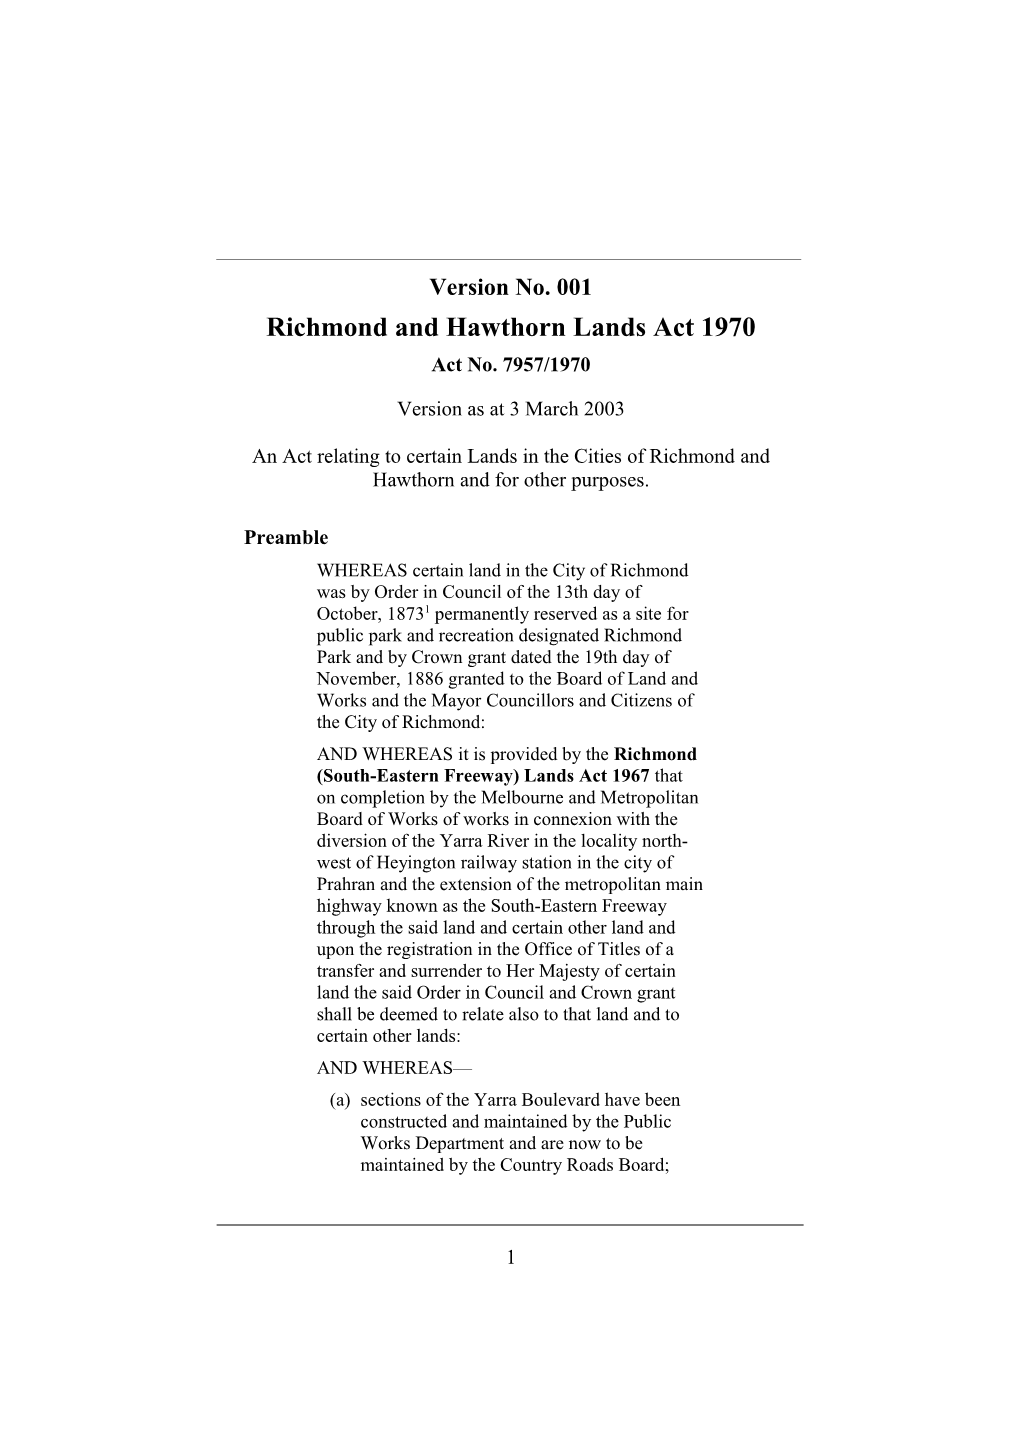 Richmond and Hawthorn Lands Act 1970